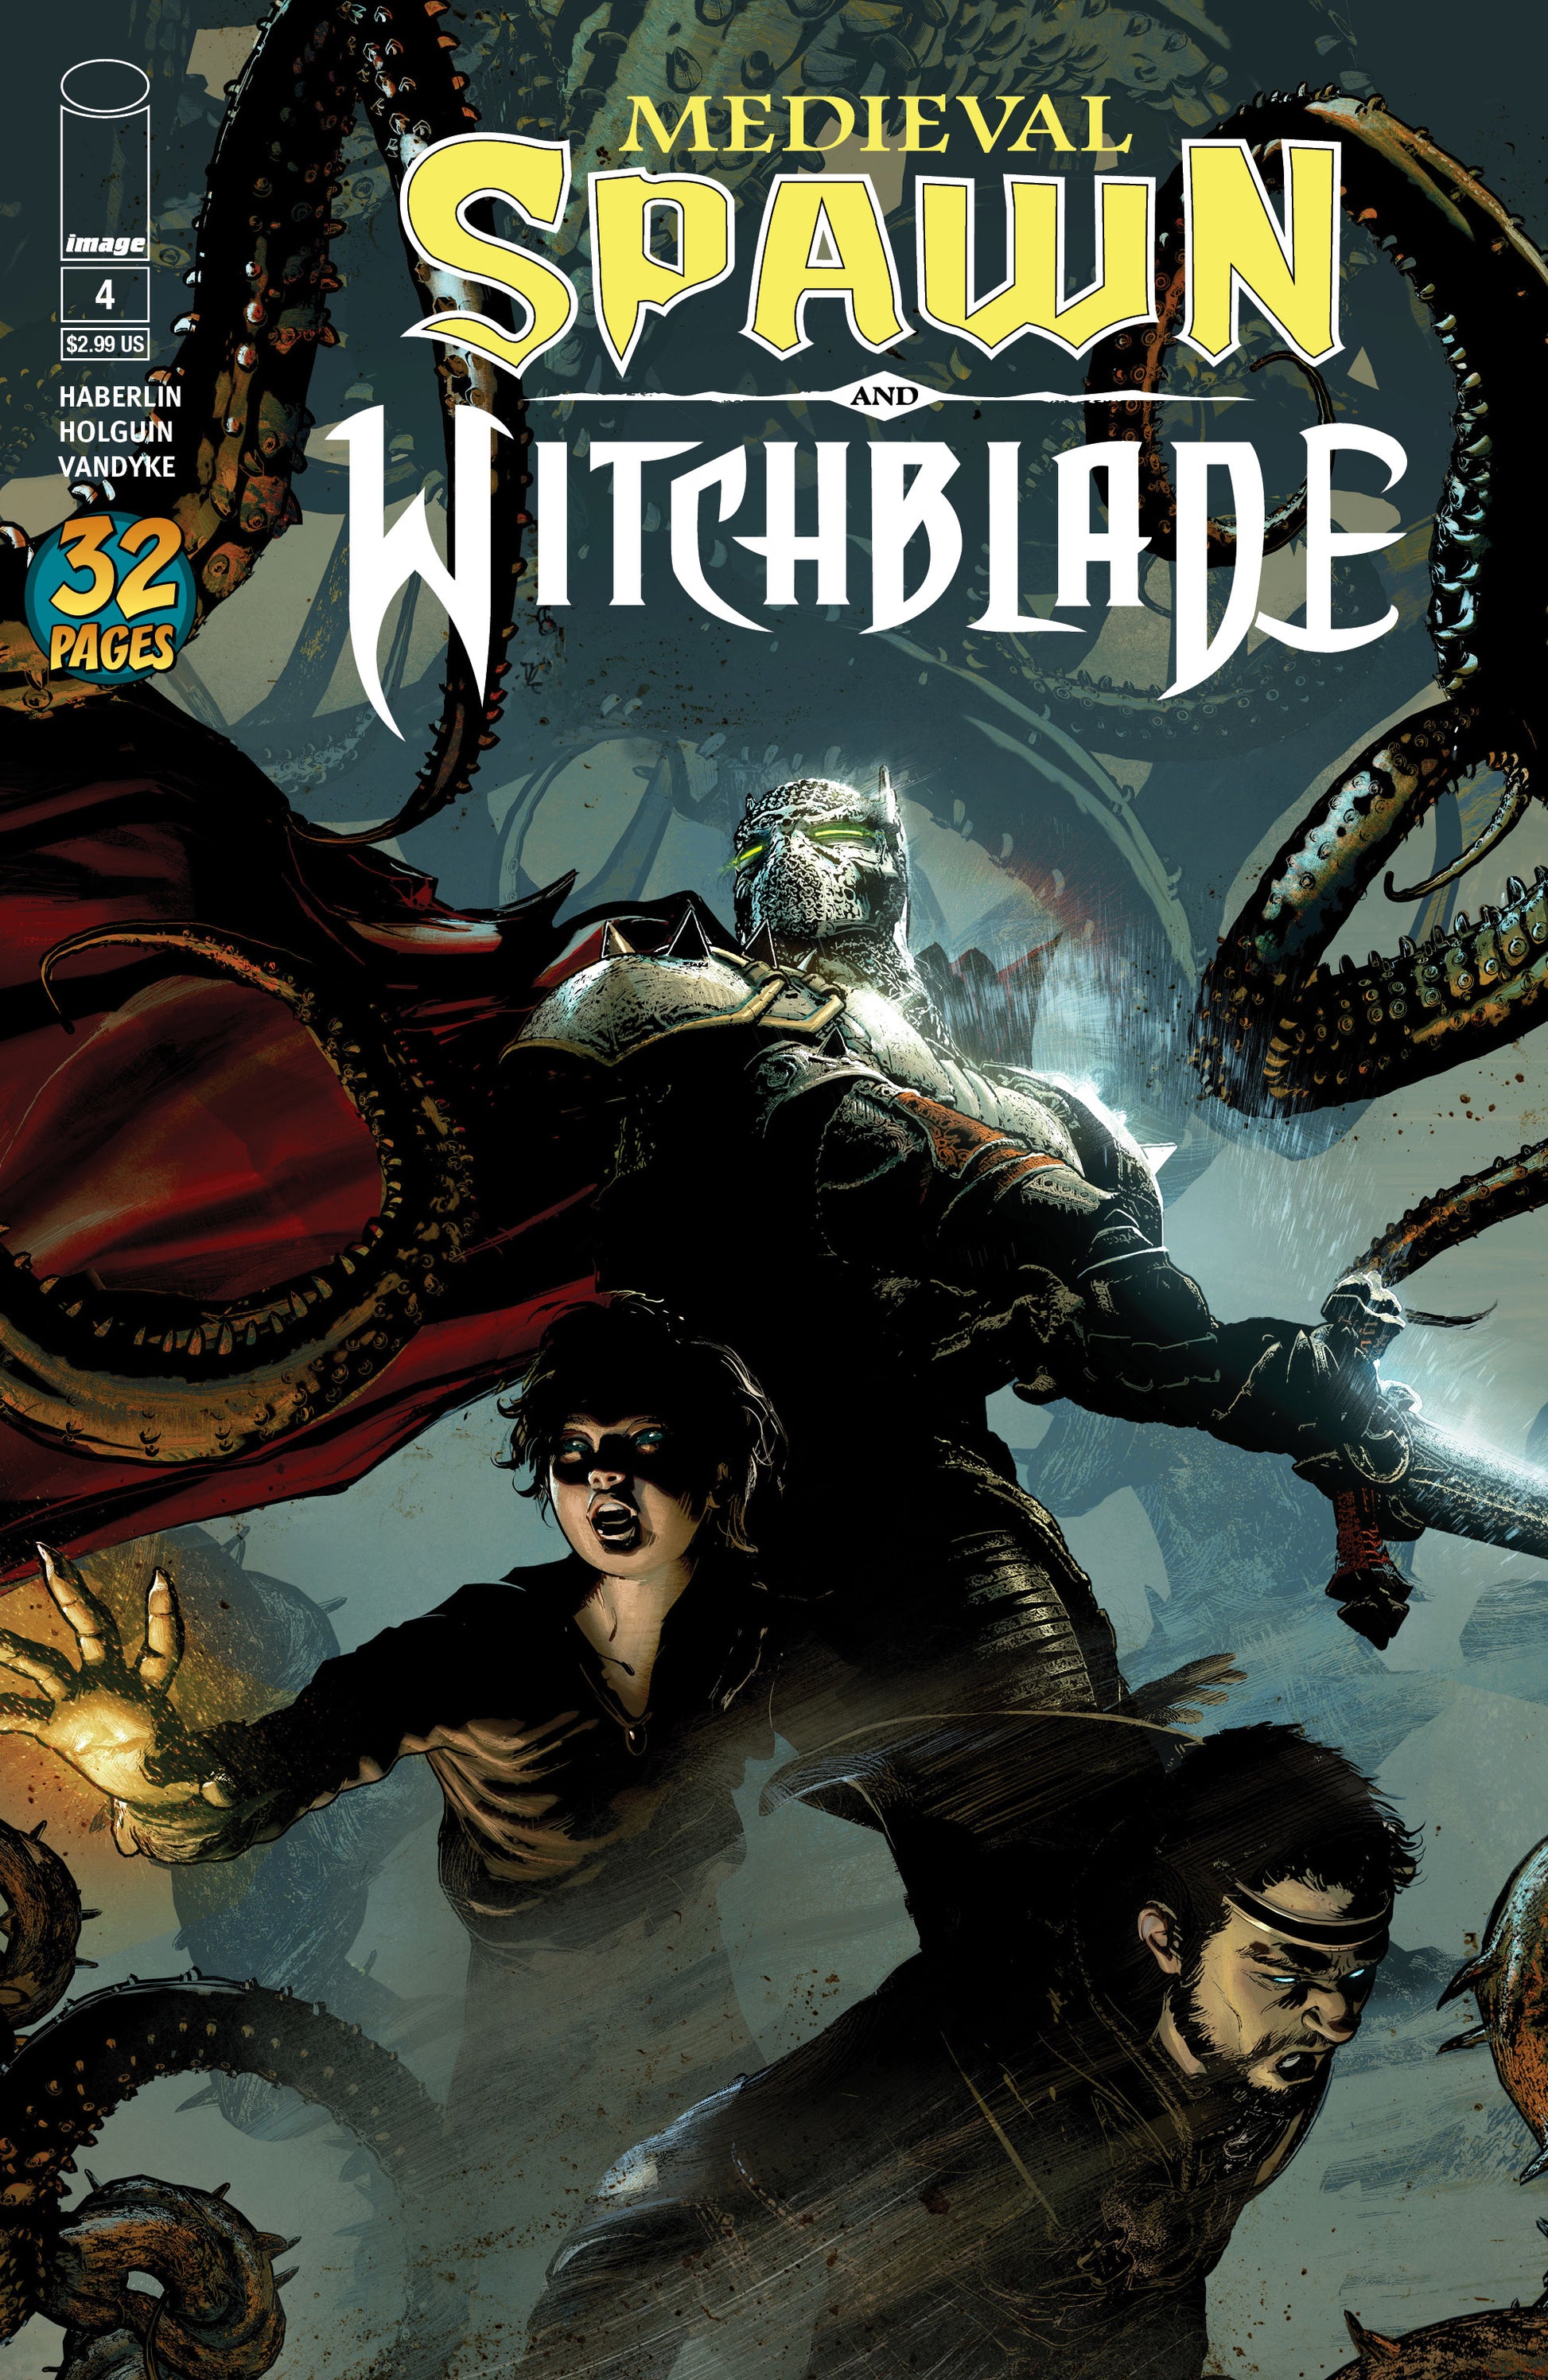 MEDIEVAL SPAWN WITCHBLADE #4 (OF 4) CVR A HABERLIN COVER